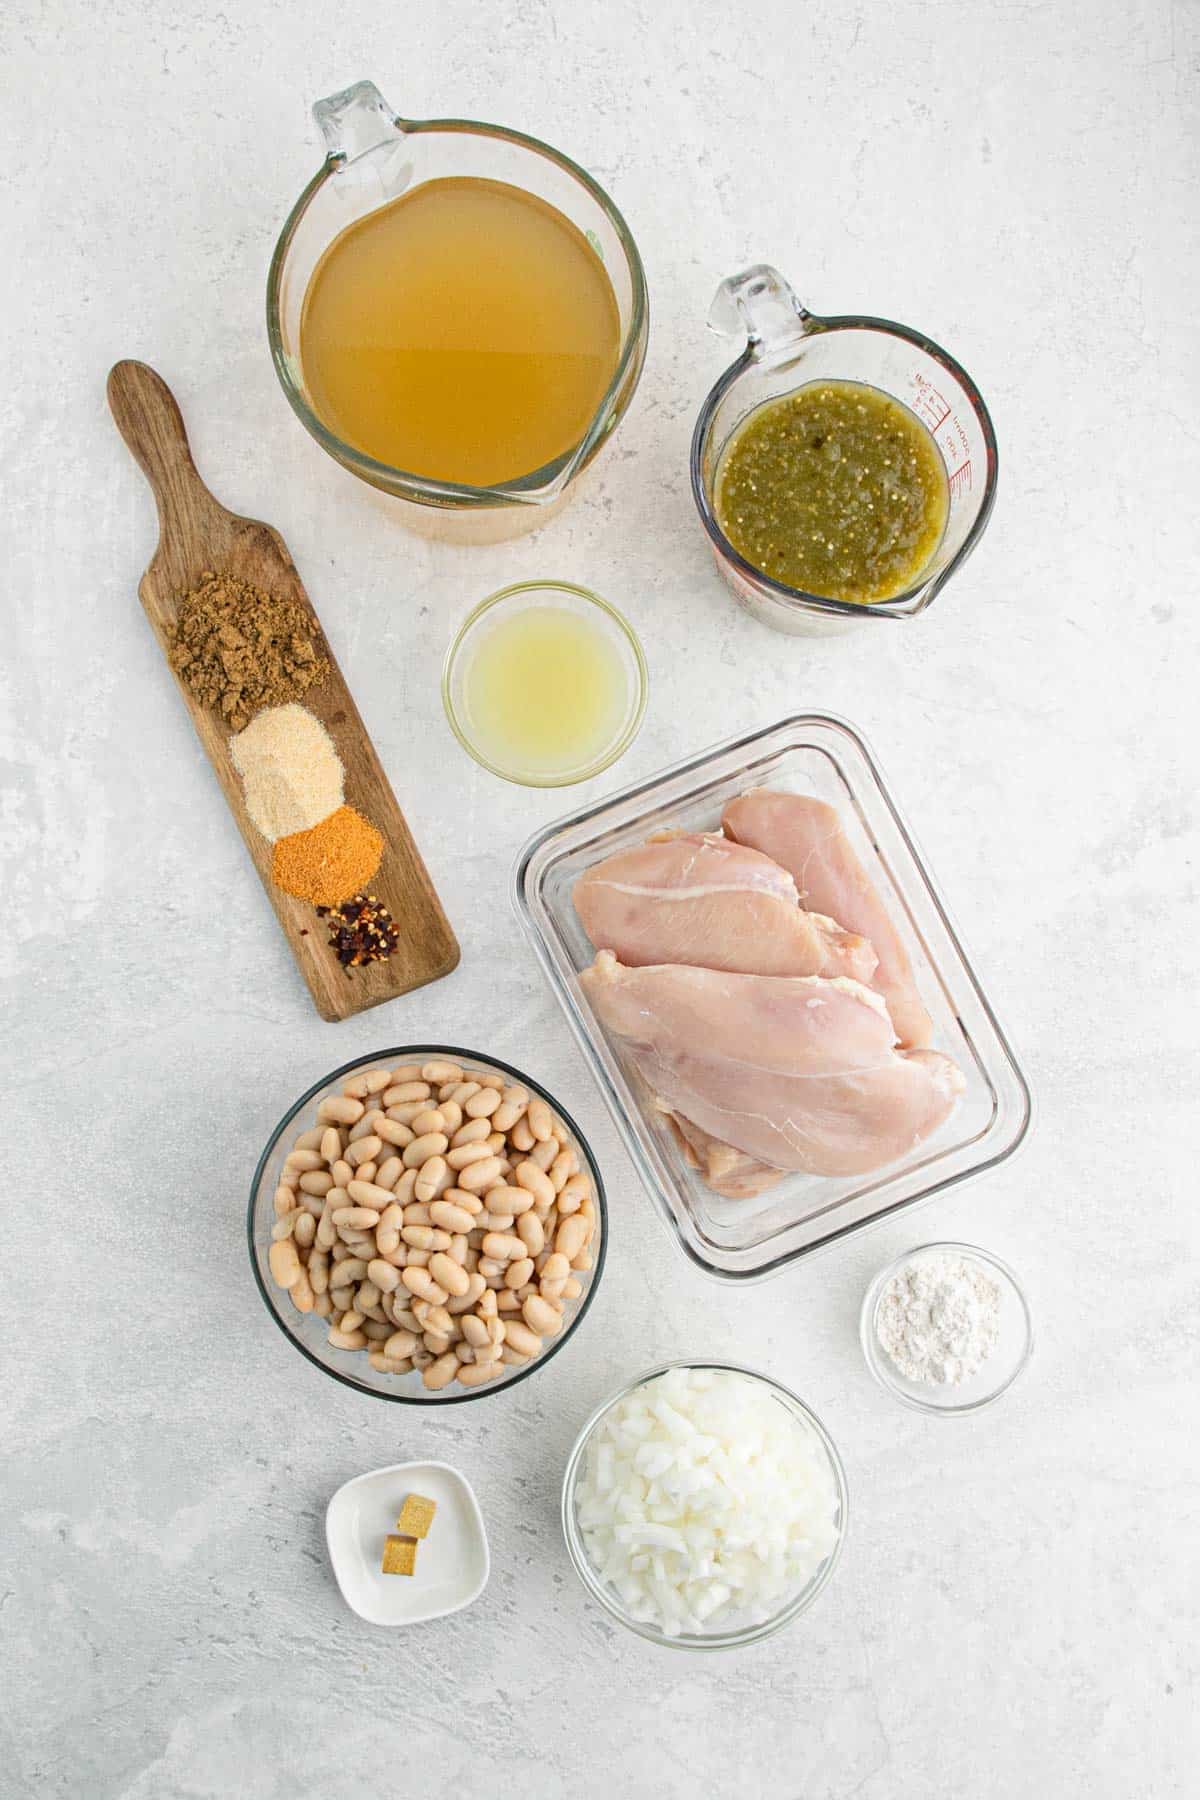 Ingredients to make slow cooker white chicken chili.